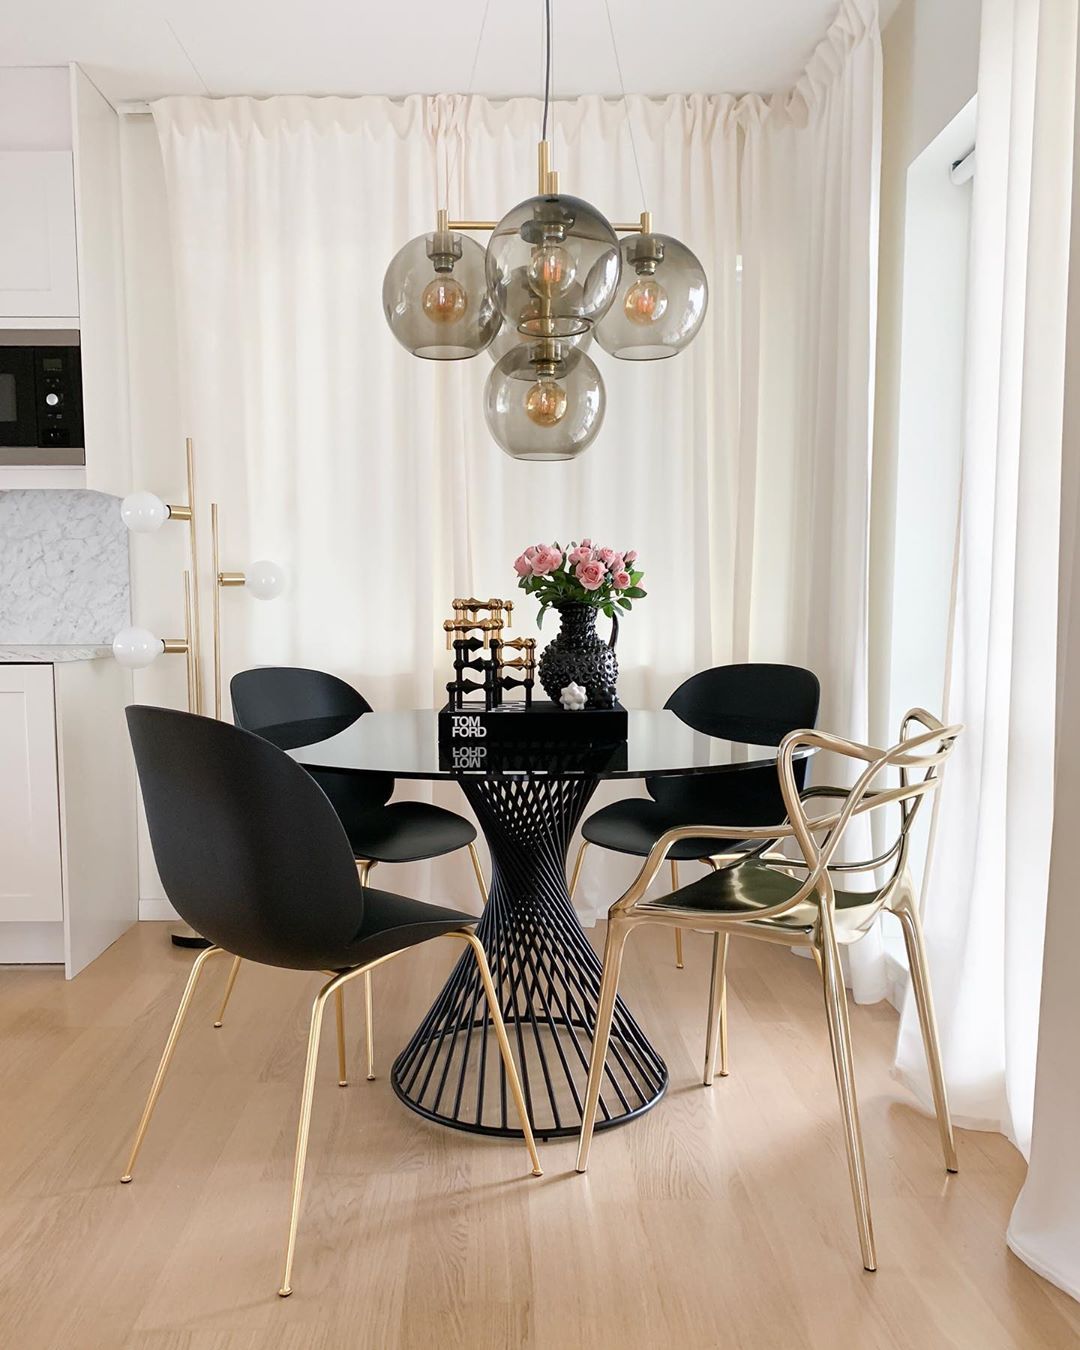 Glam Dining Room with Black and Gold Decor via @interiorbyvanessa